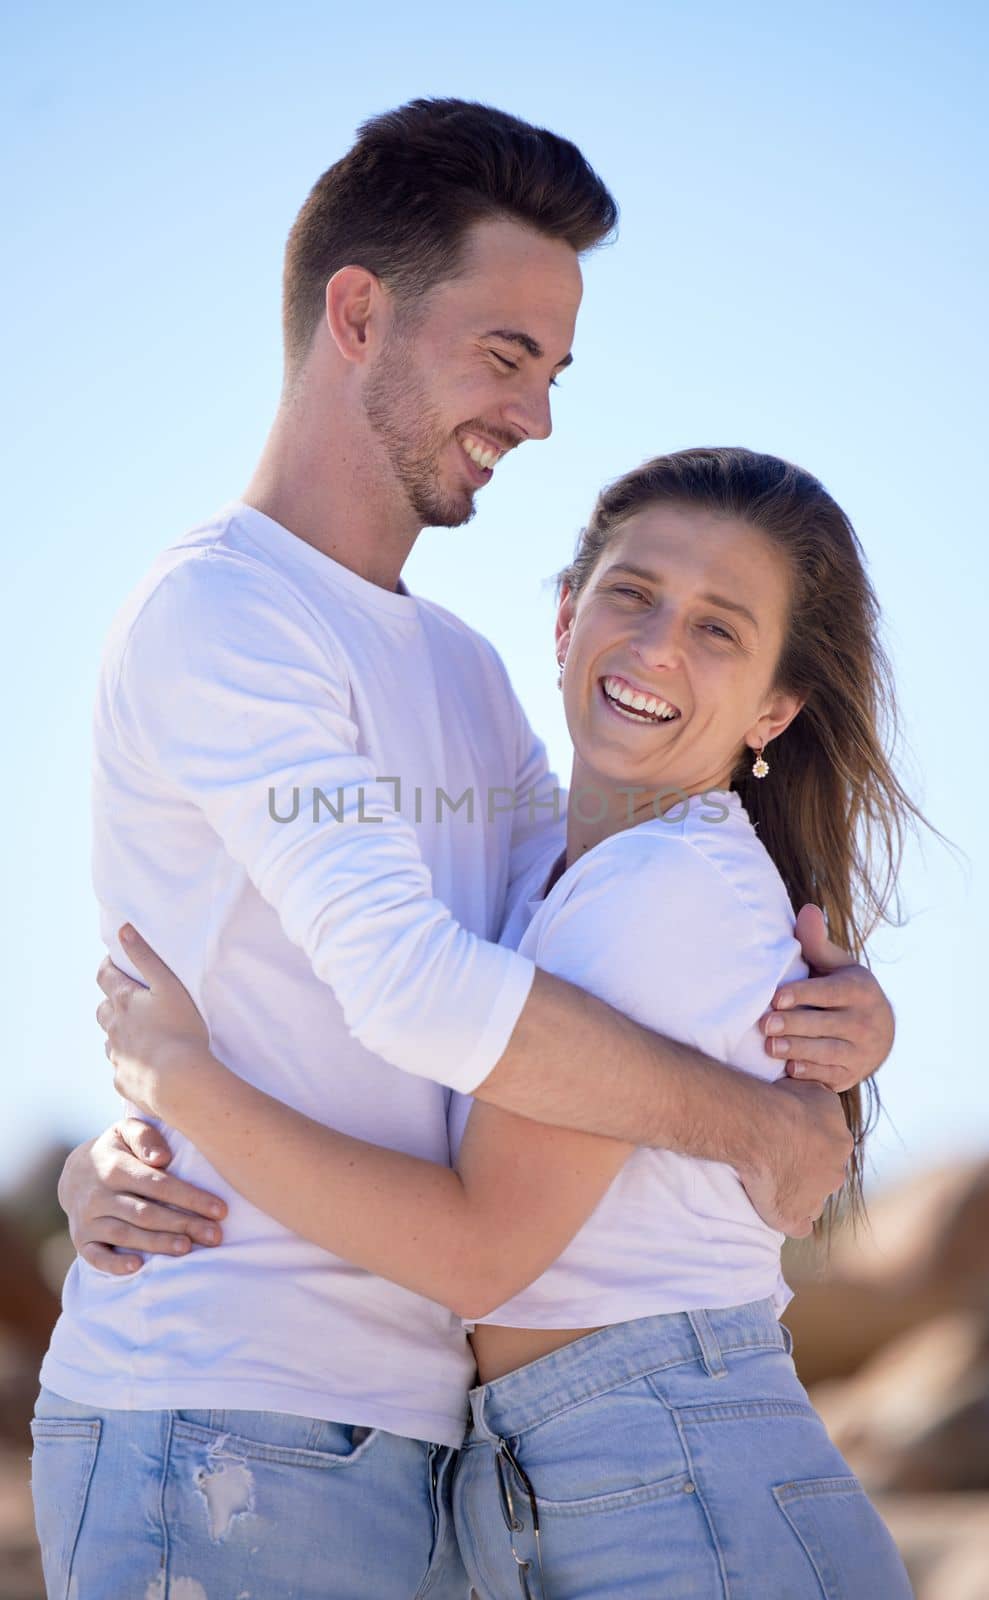 Portrait, couple love and hug at beach and happy with smile for relationship, romantic date or vacation together. Romance, man and woman with happiness, summer and embrace for travel or holiday.